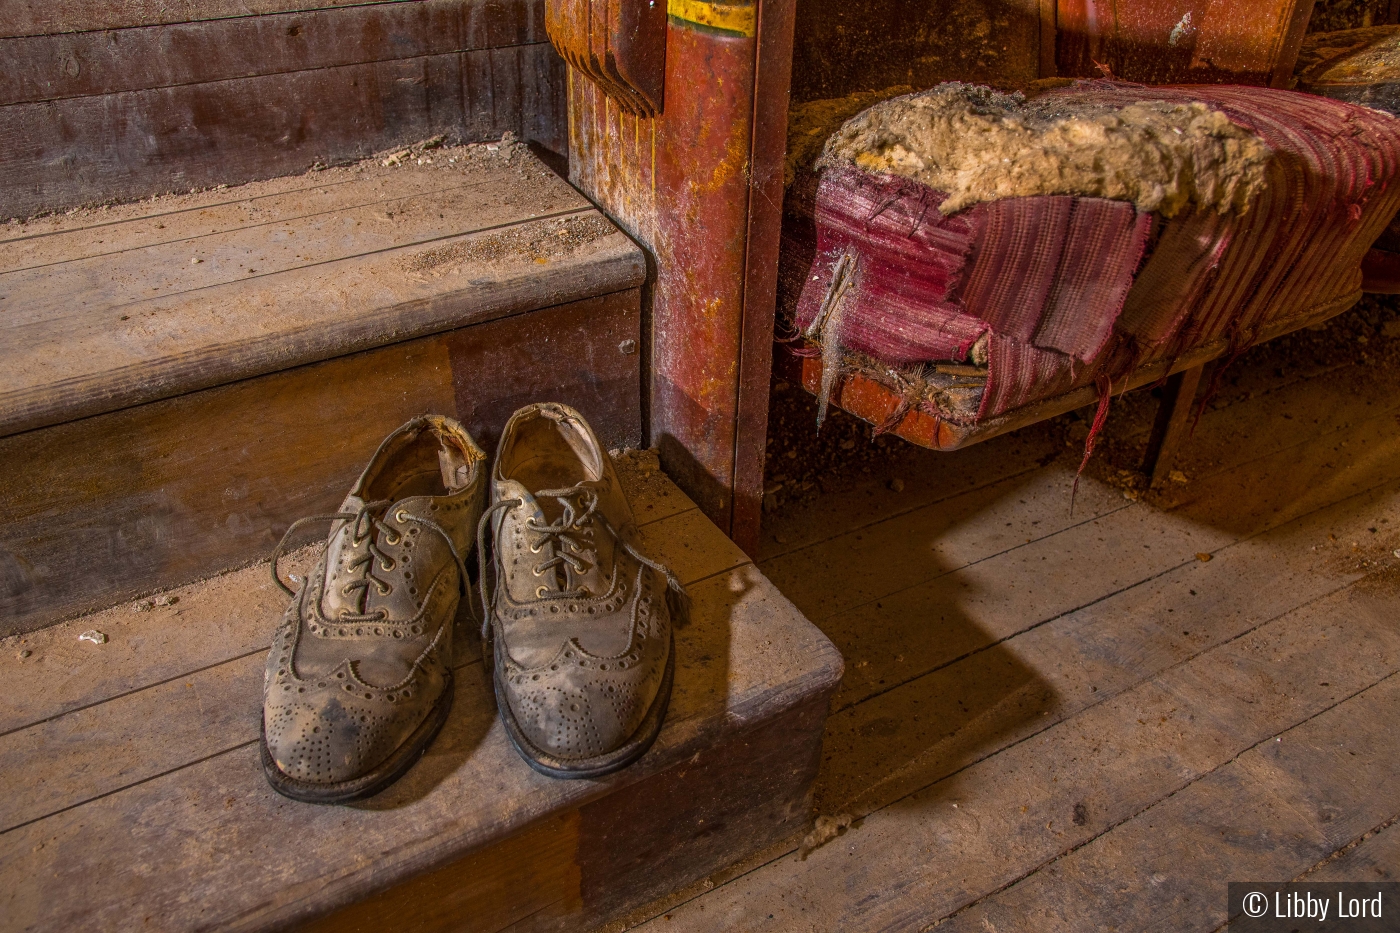 Shoes left behind at the old Majestic Theatre by Libby Lord